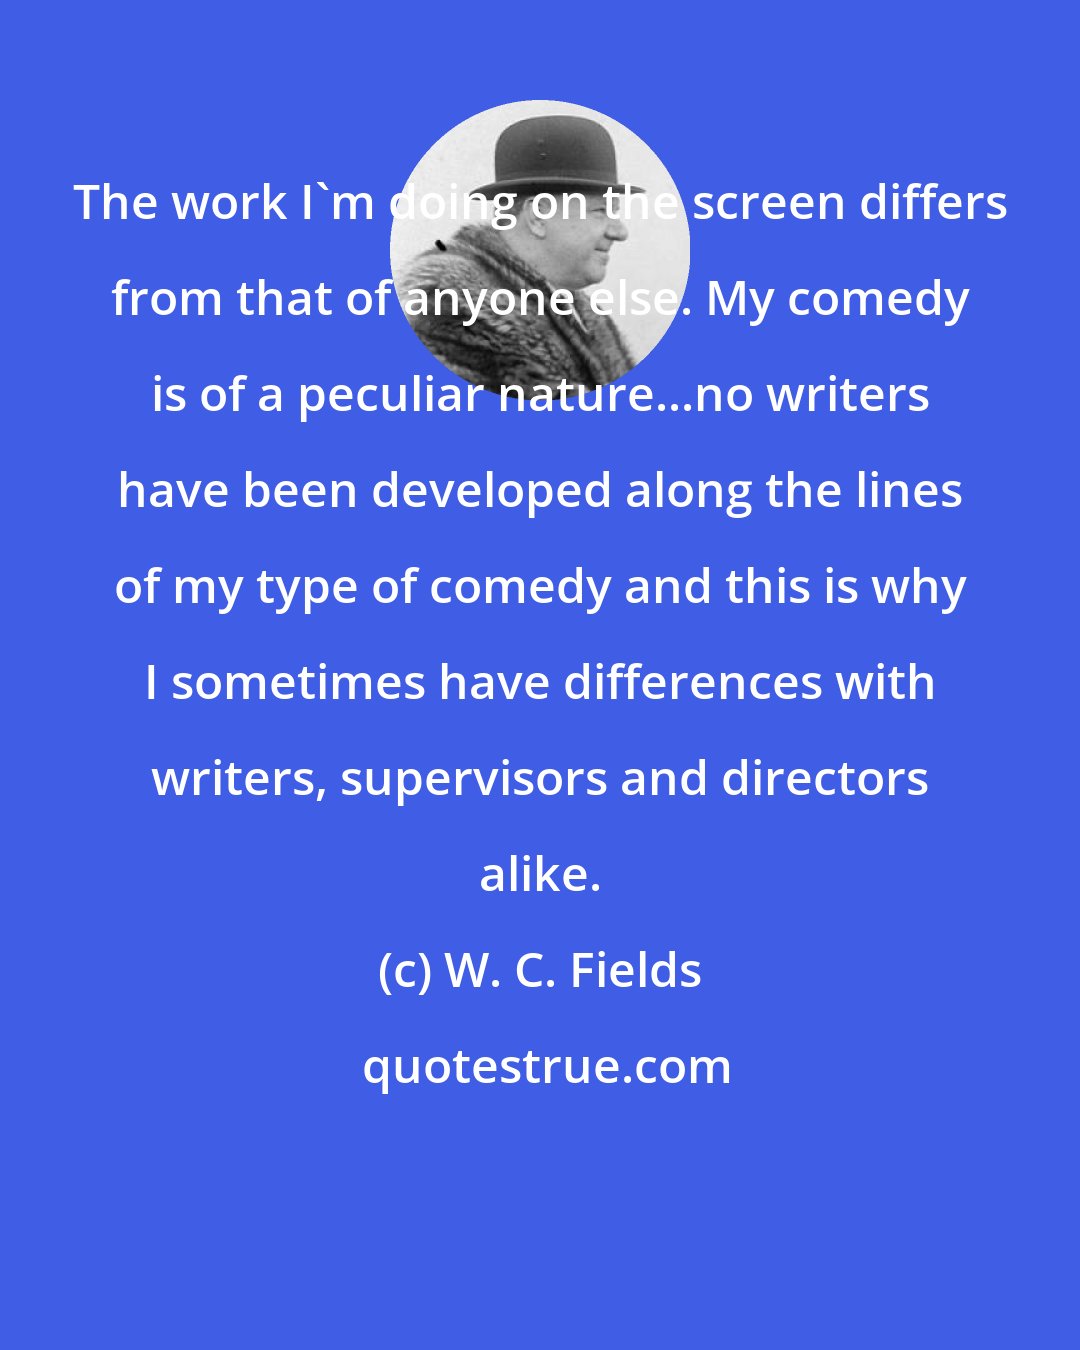 W. C. Fields: The work I'm doing on the screen differs from that of anyone else. My comedy is of a peculiar nature...no writers have been developed along the lines of my type of comedy and this is why I sometimes have differences with writers, supervisors and directors alike.